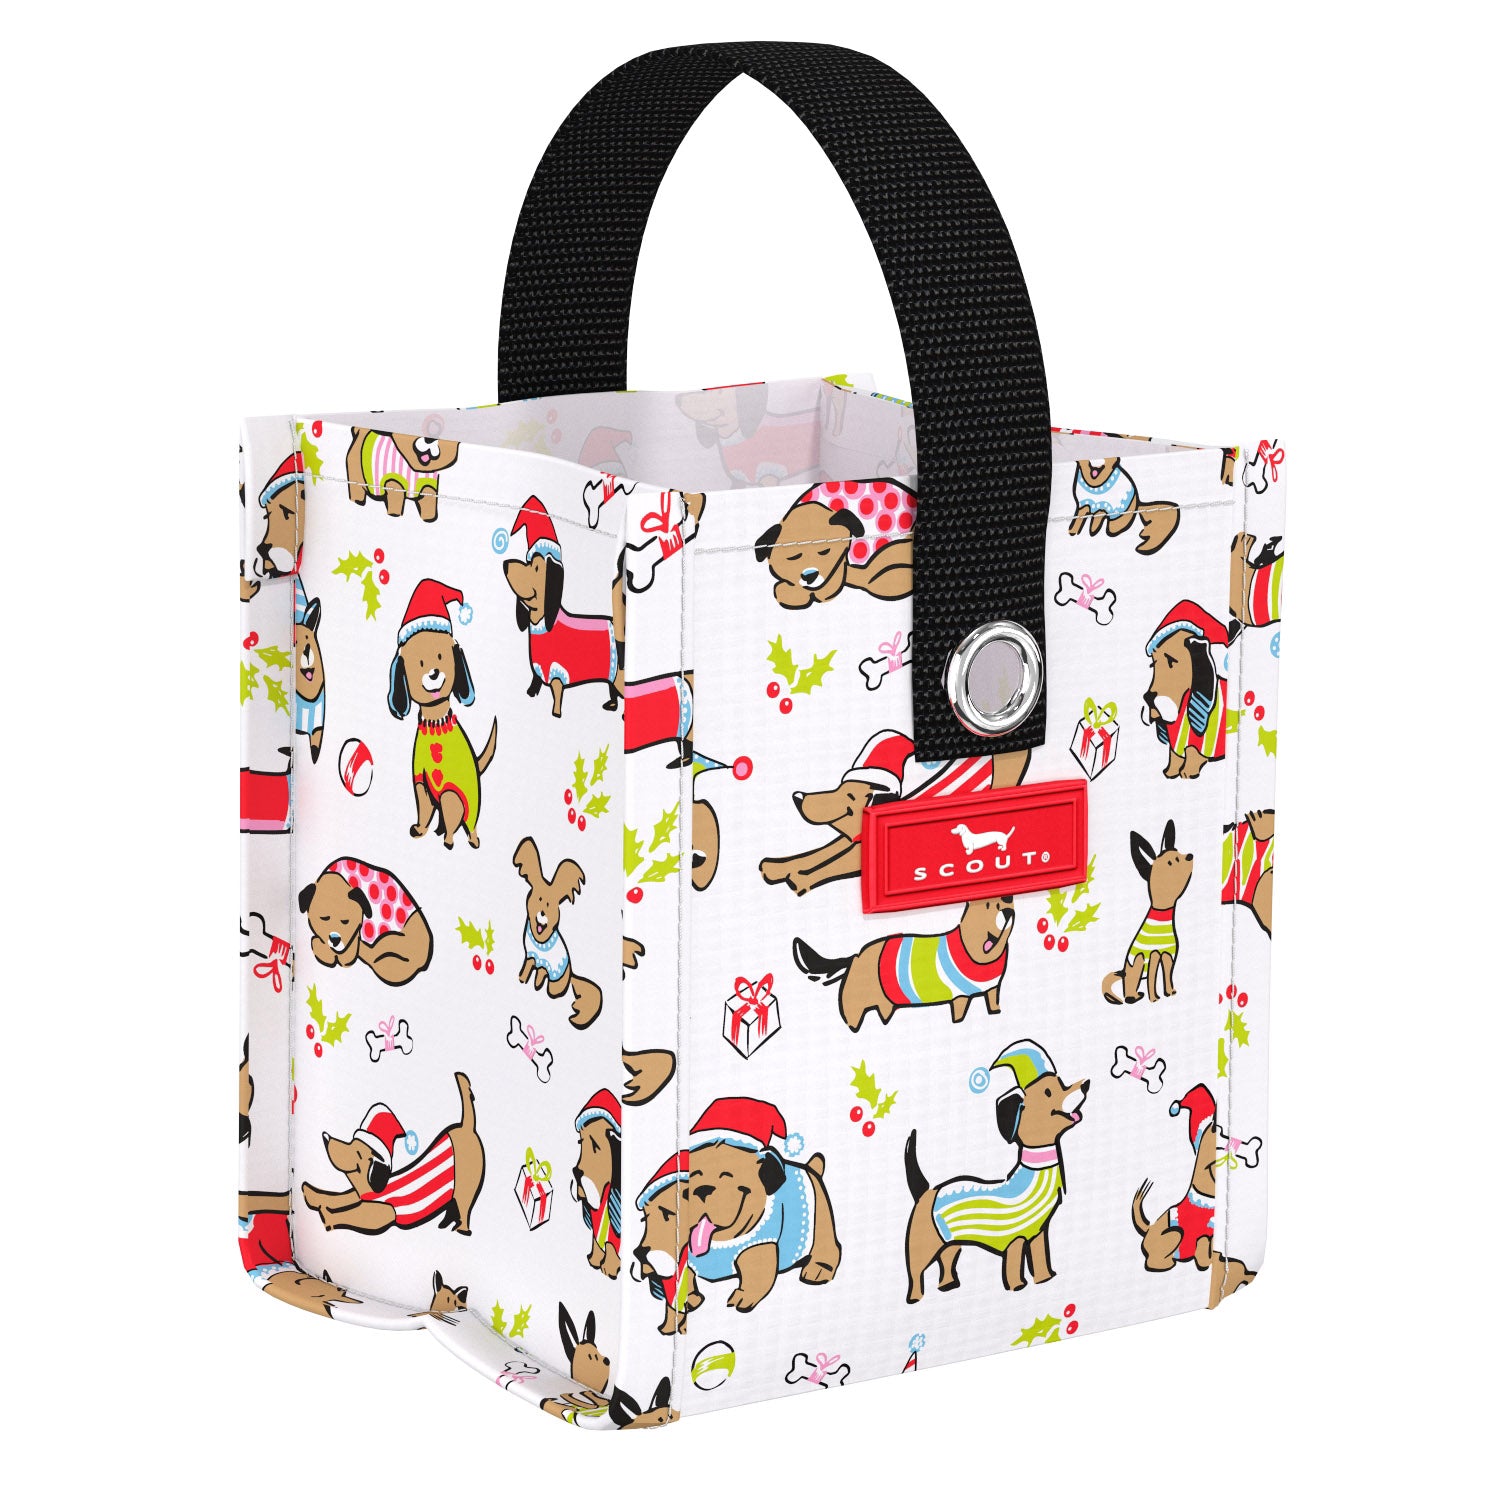 Scout Mini Package Gift Bag, Small Reusable Bag Measuring 5.75 x 4.75 x 4.75